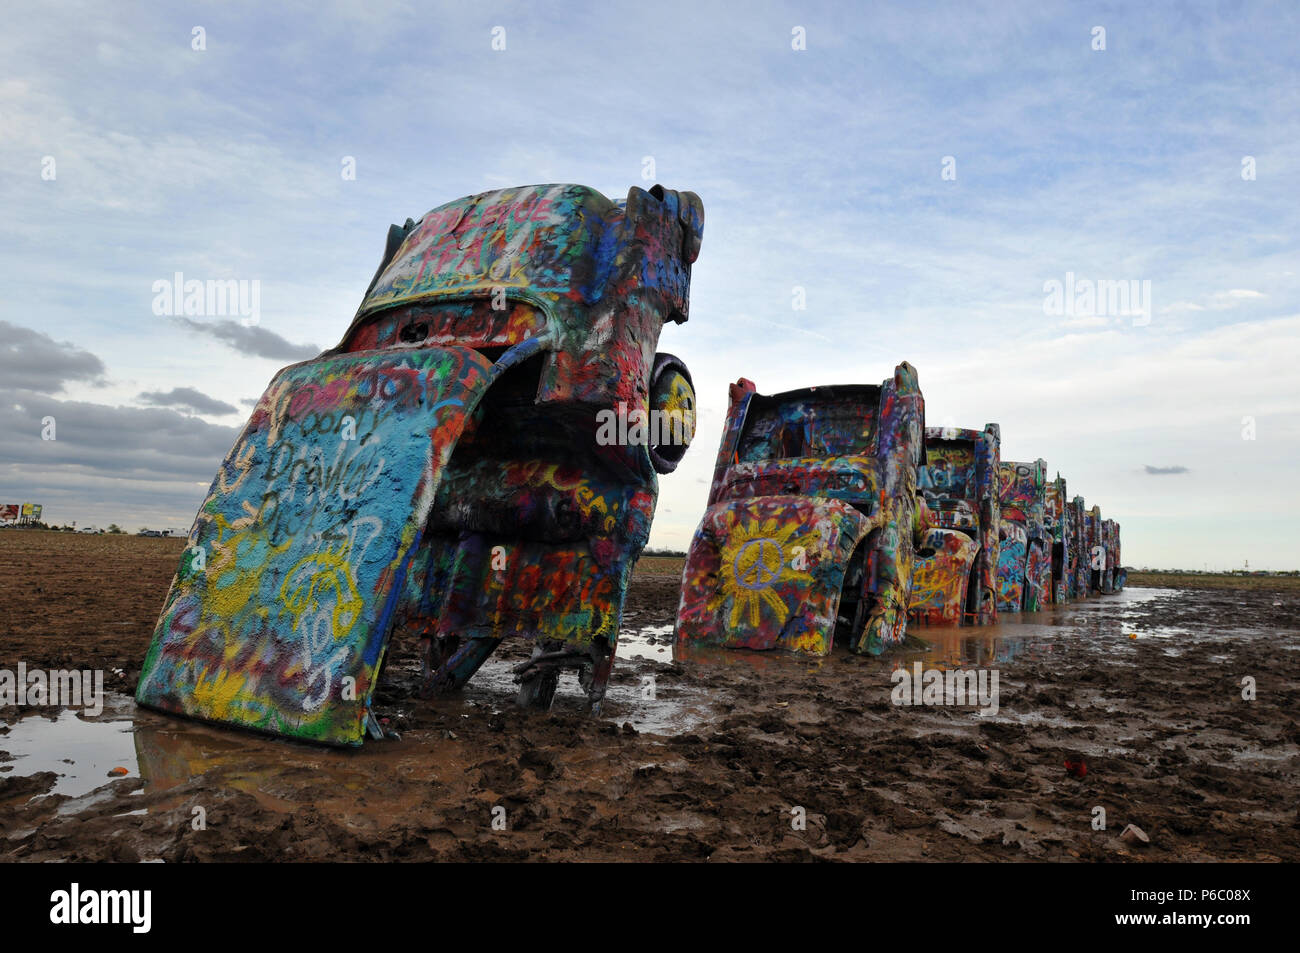 Cadillac Ranch, an art installation along Route 66 in Amarillo, Texas. It was created in 1974 by the art collective Ant Farm, using 10 Cadillac cars. Stock Photo